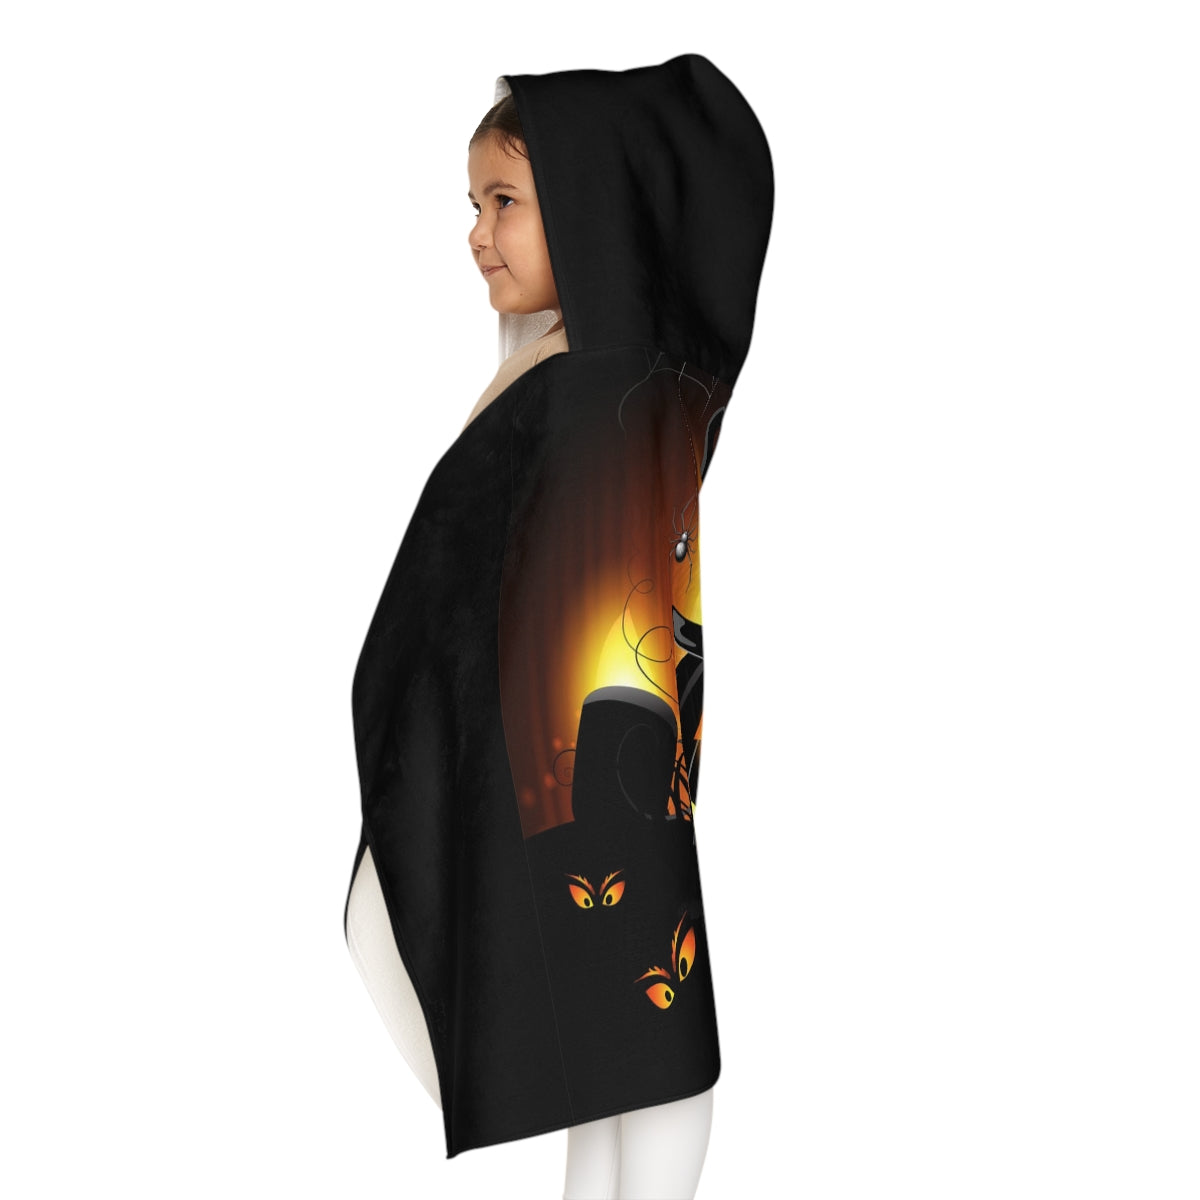 Fright Night Youth Hooded Towel